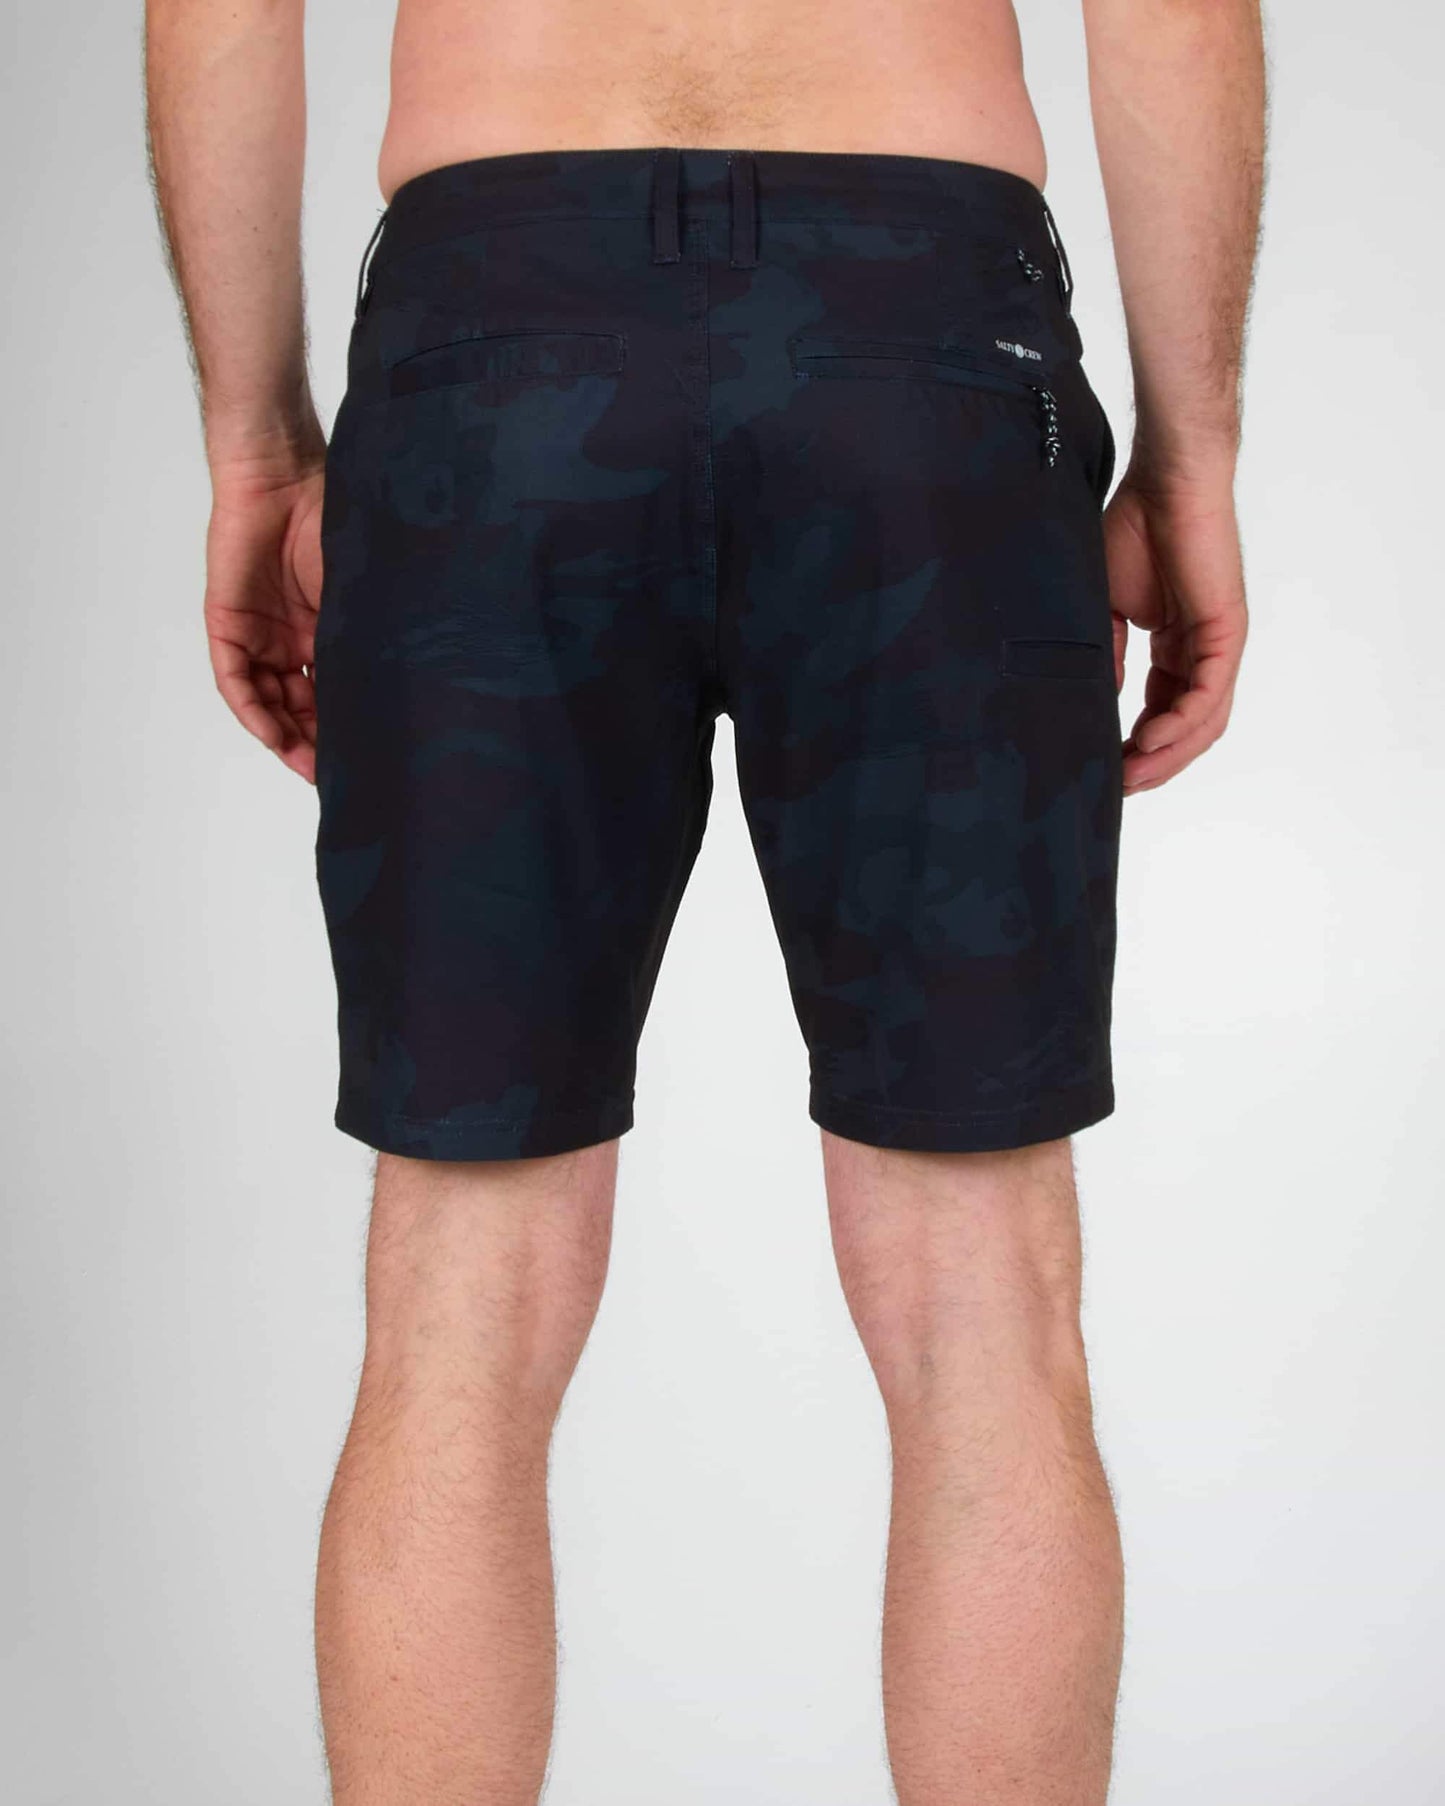 Salty Crew Hombres - Drifter 2 Perforated - Black Camo